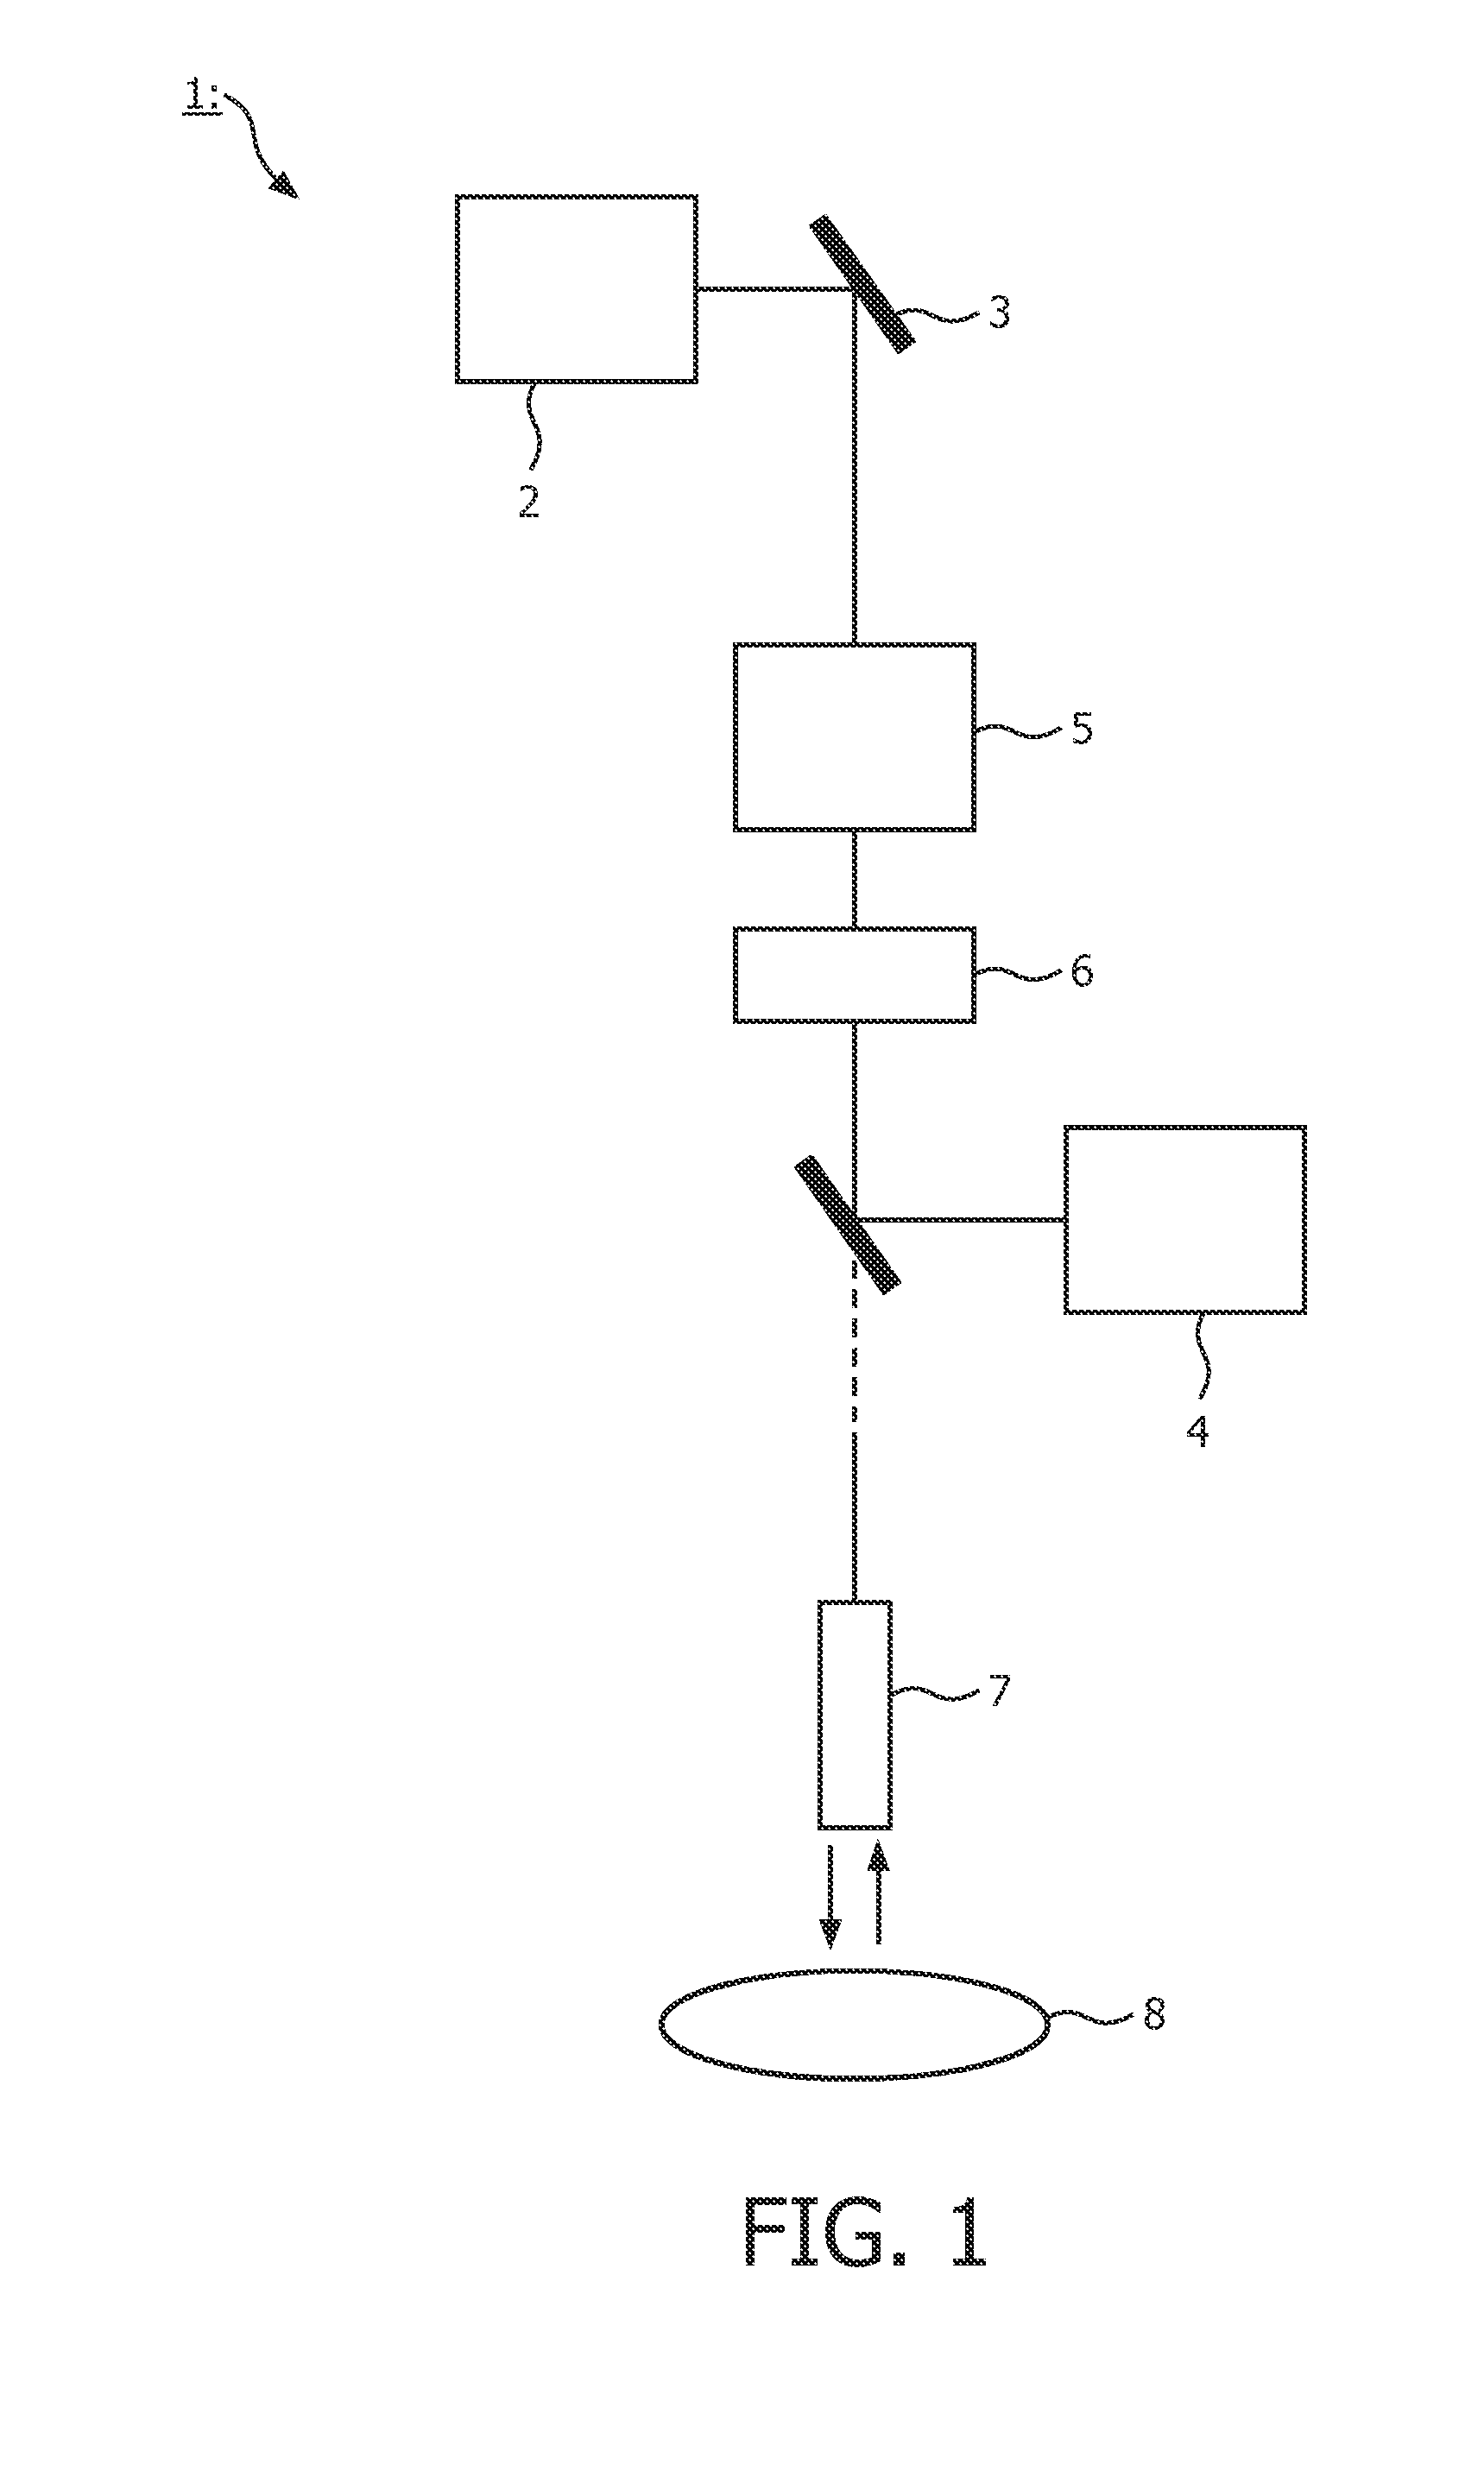 Pulse splitter with dispersion compensation